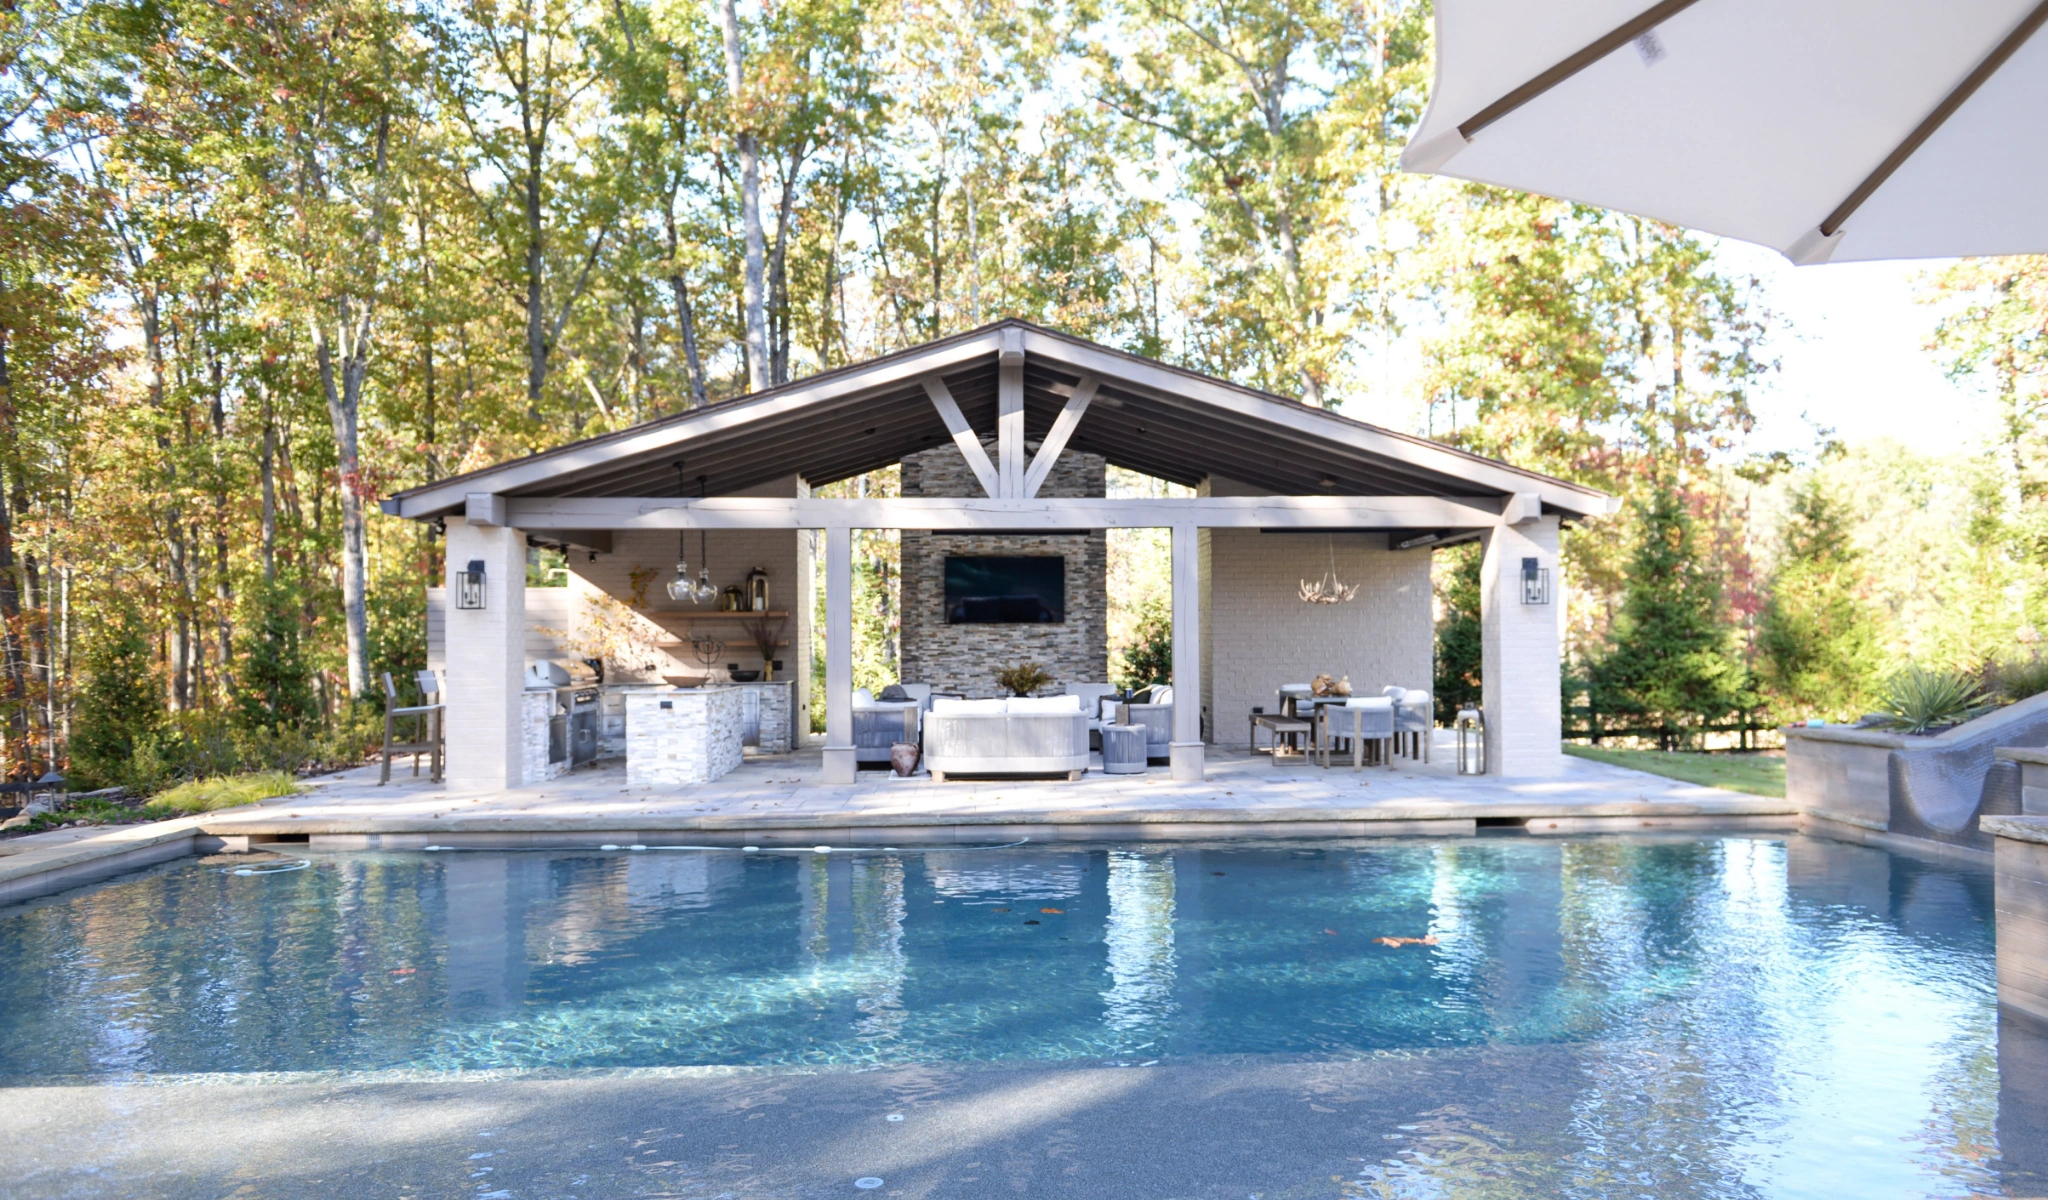 A backyard with a pool and patio furniture.